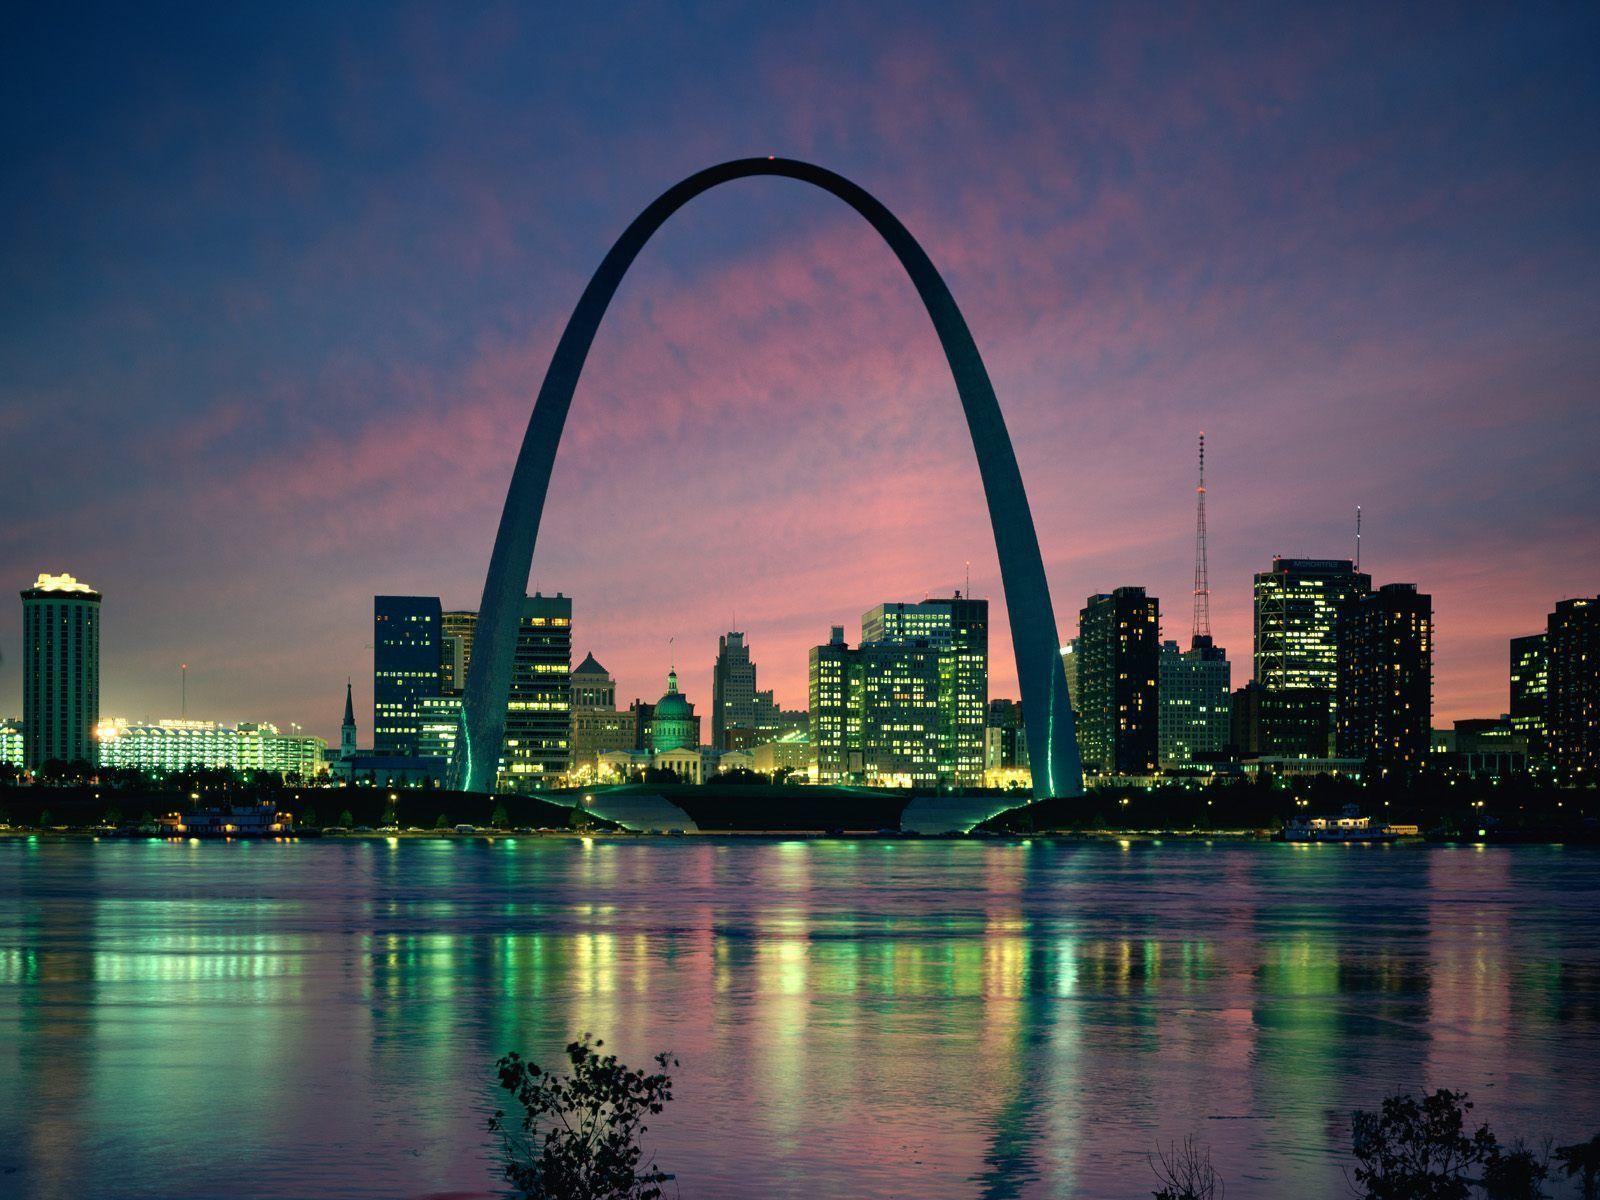 St. Louis City Wallpapers